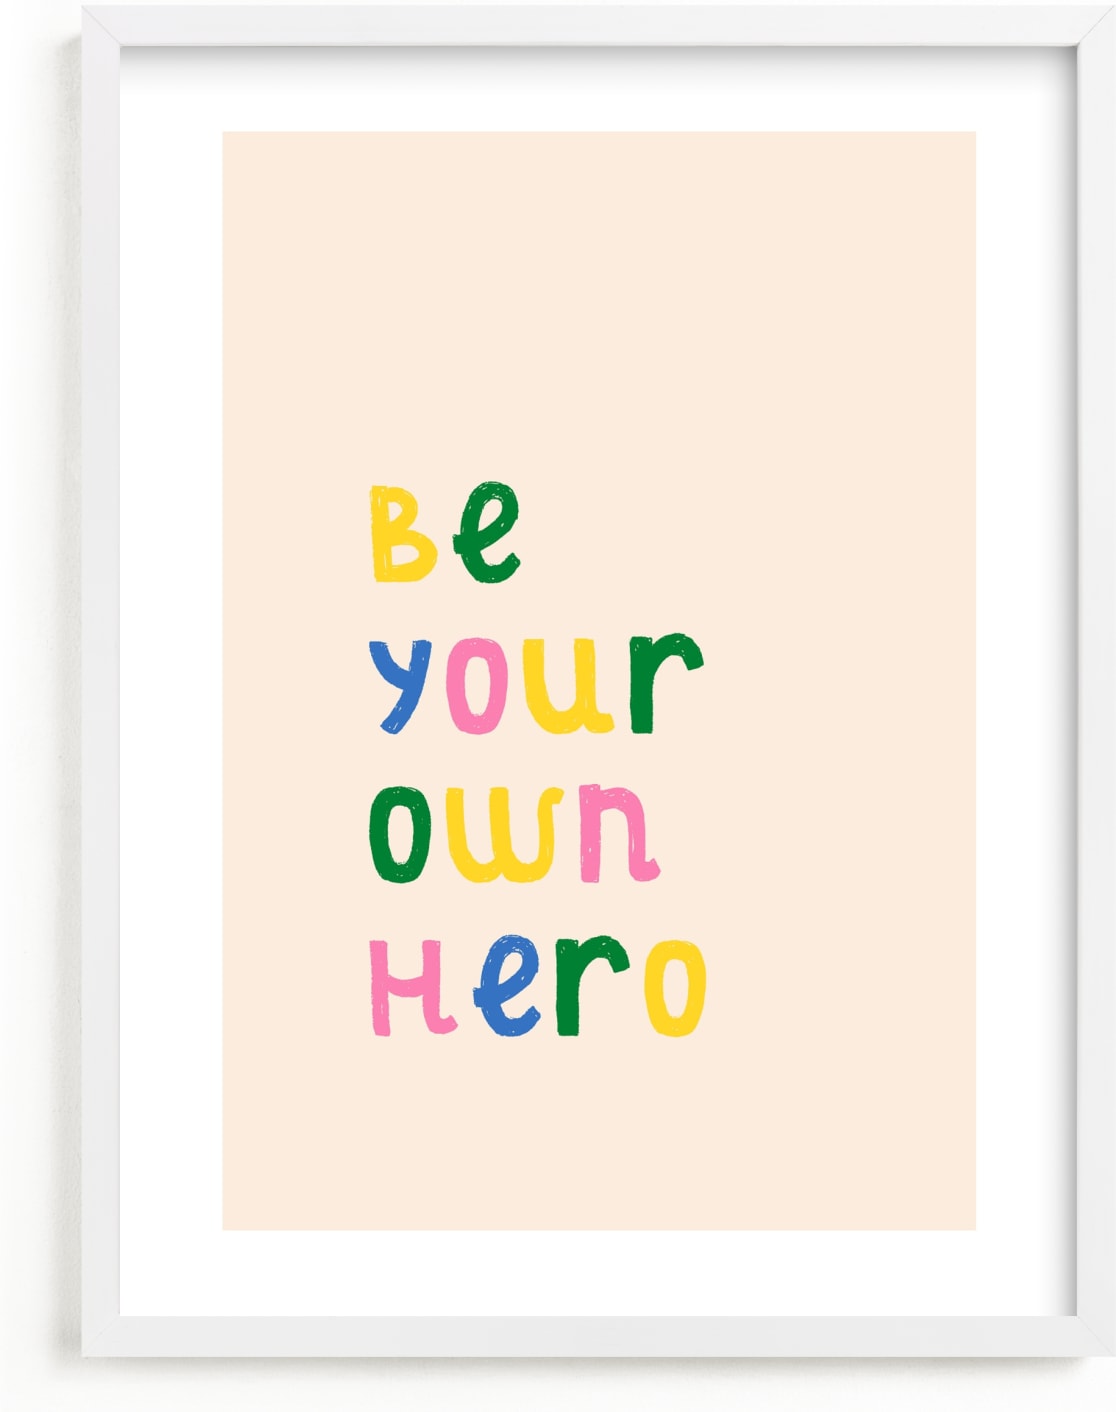 This is a yellow kids wall art by Iveta Angelova called Be Your Own Hero.